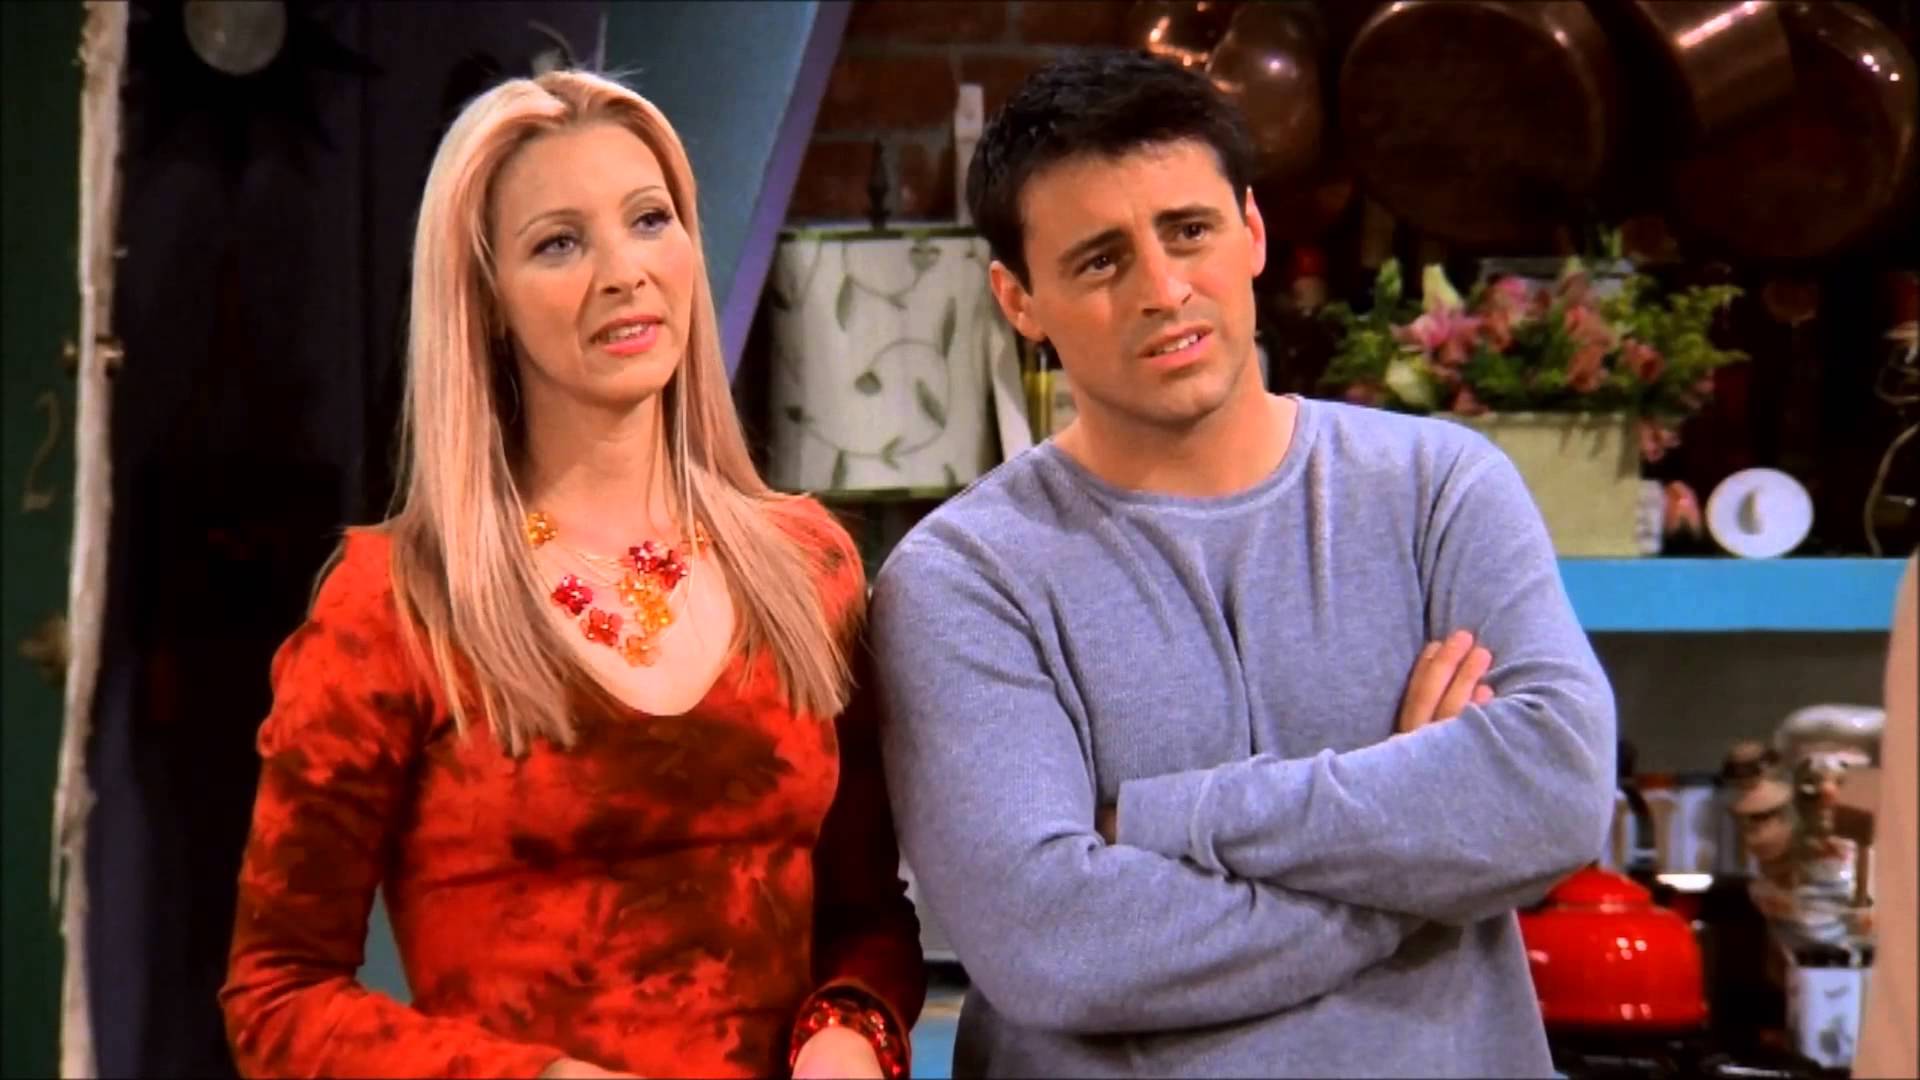 Friends The Reason Joey And Phoebe Never Got Together Was Not Through